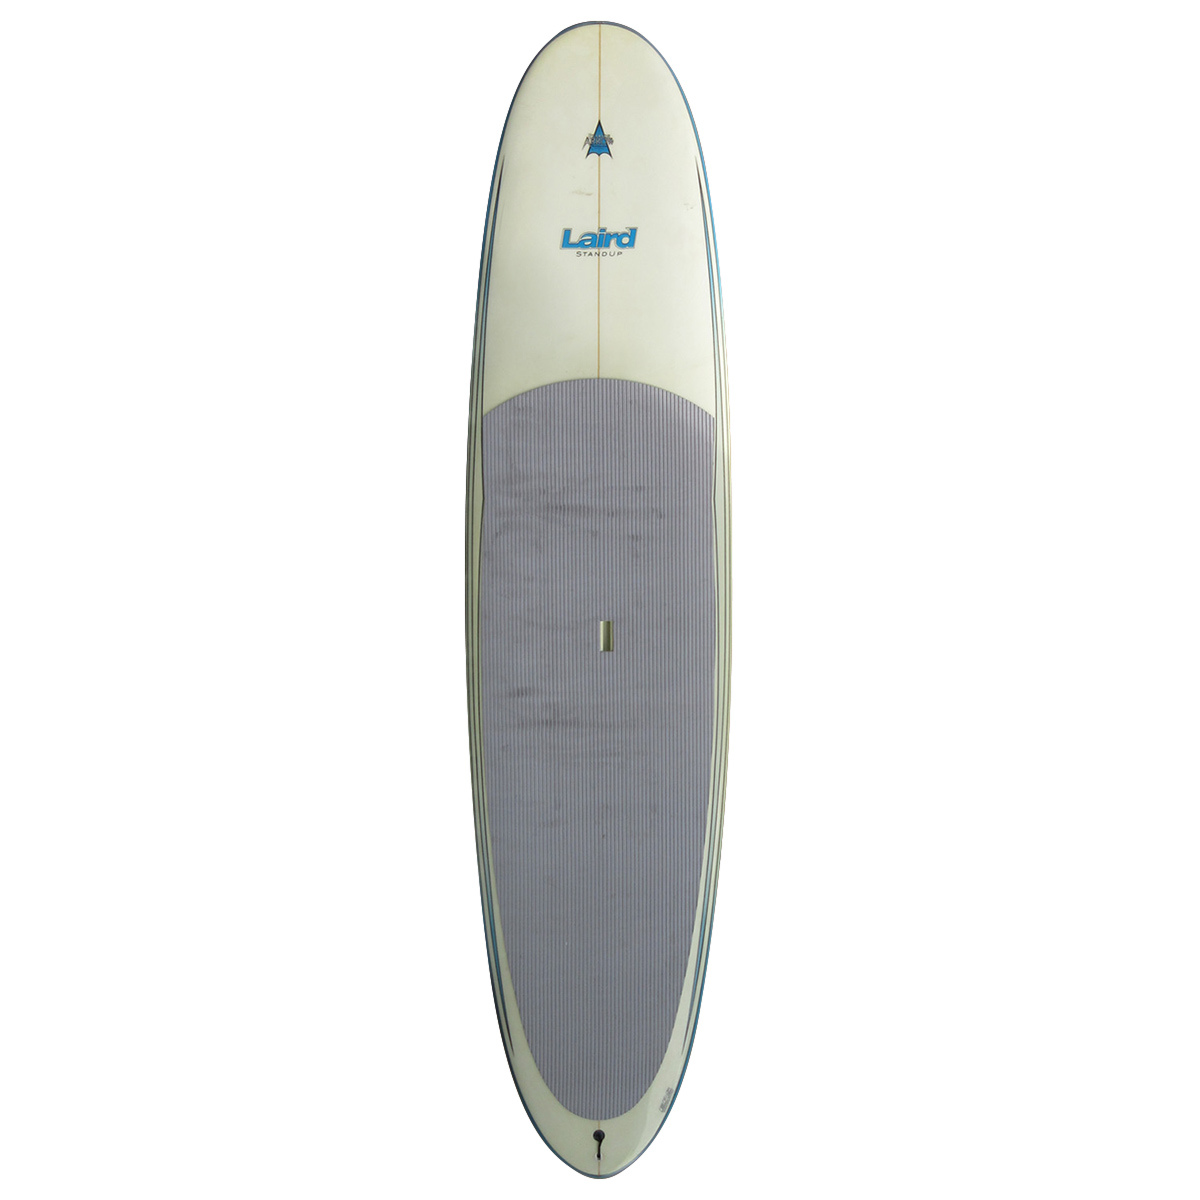 ARROW / Laird 12'6 SUP EPS Shaped by Bob Pearson